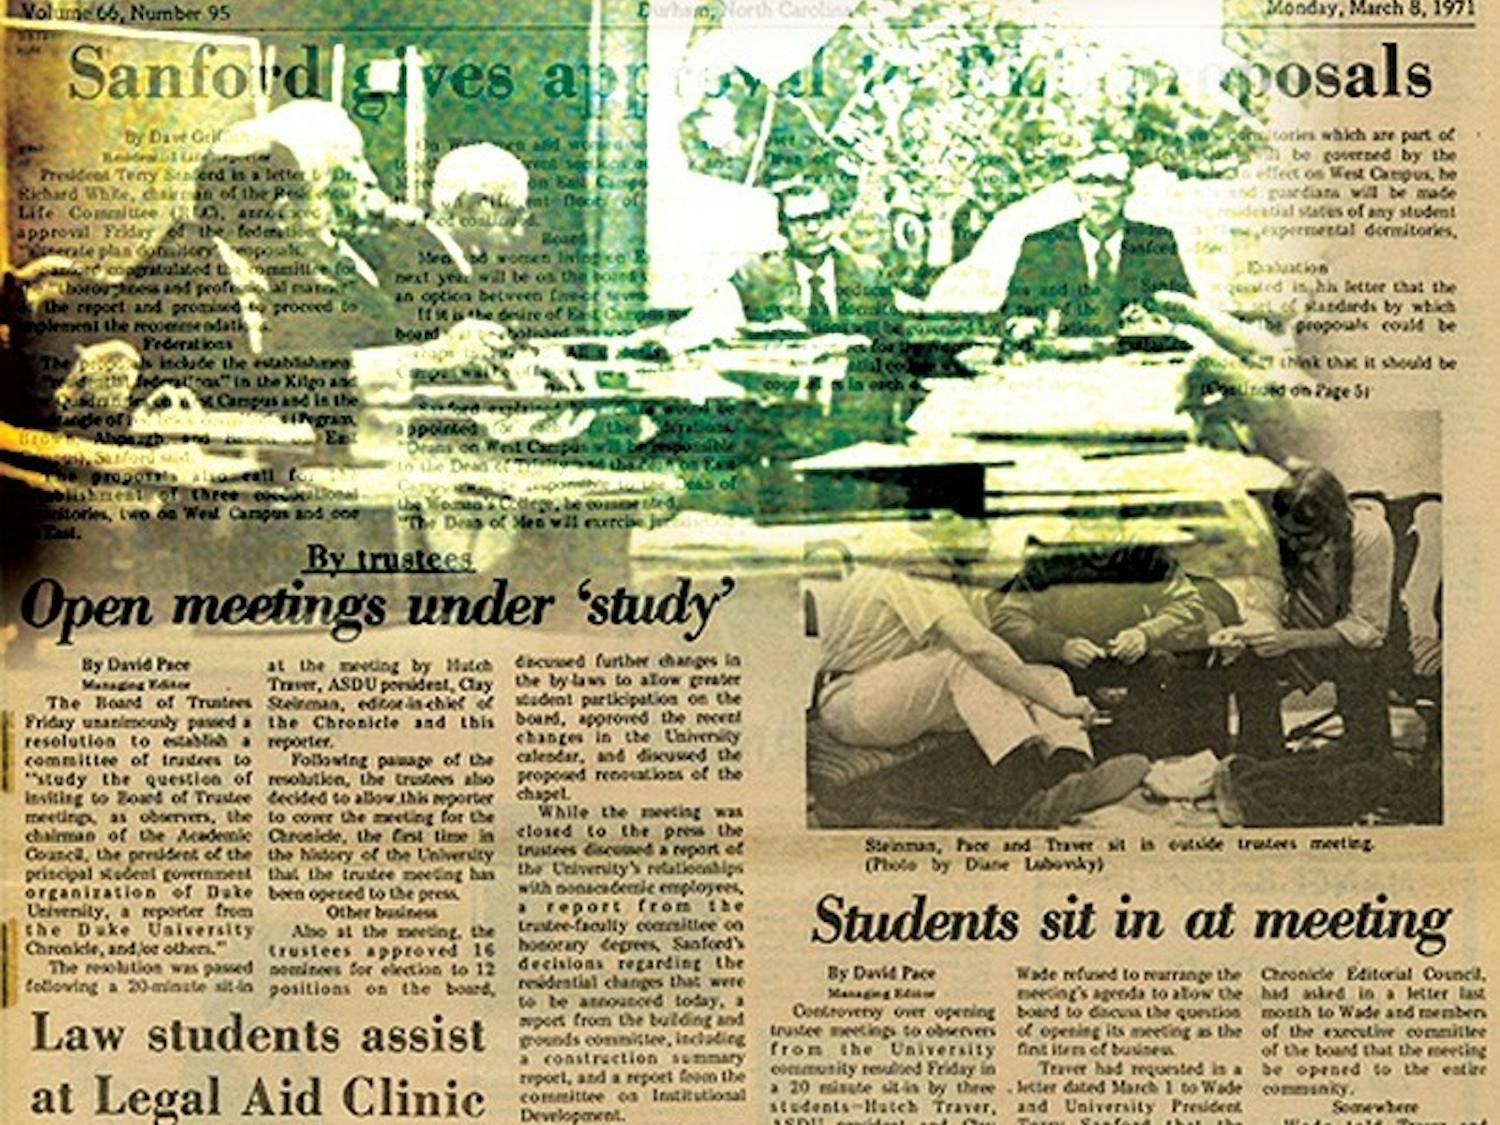 In 1971 students staged a sit-in during a Board of Trustees meeting.